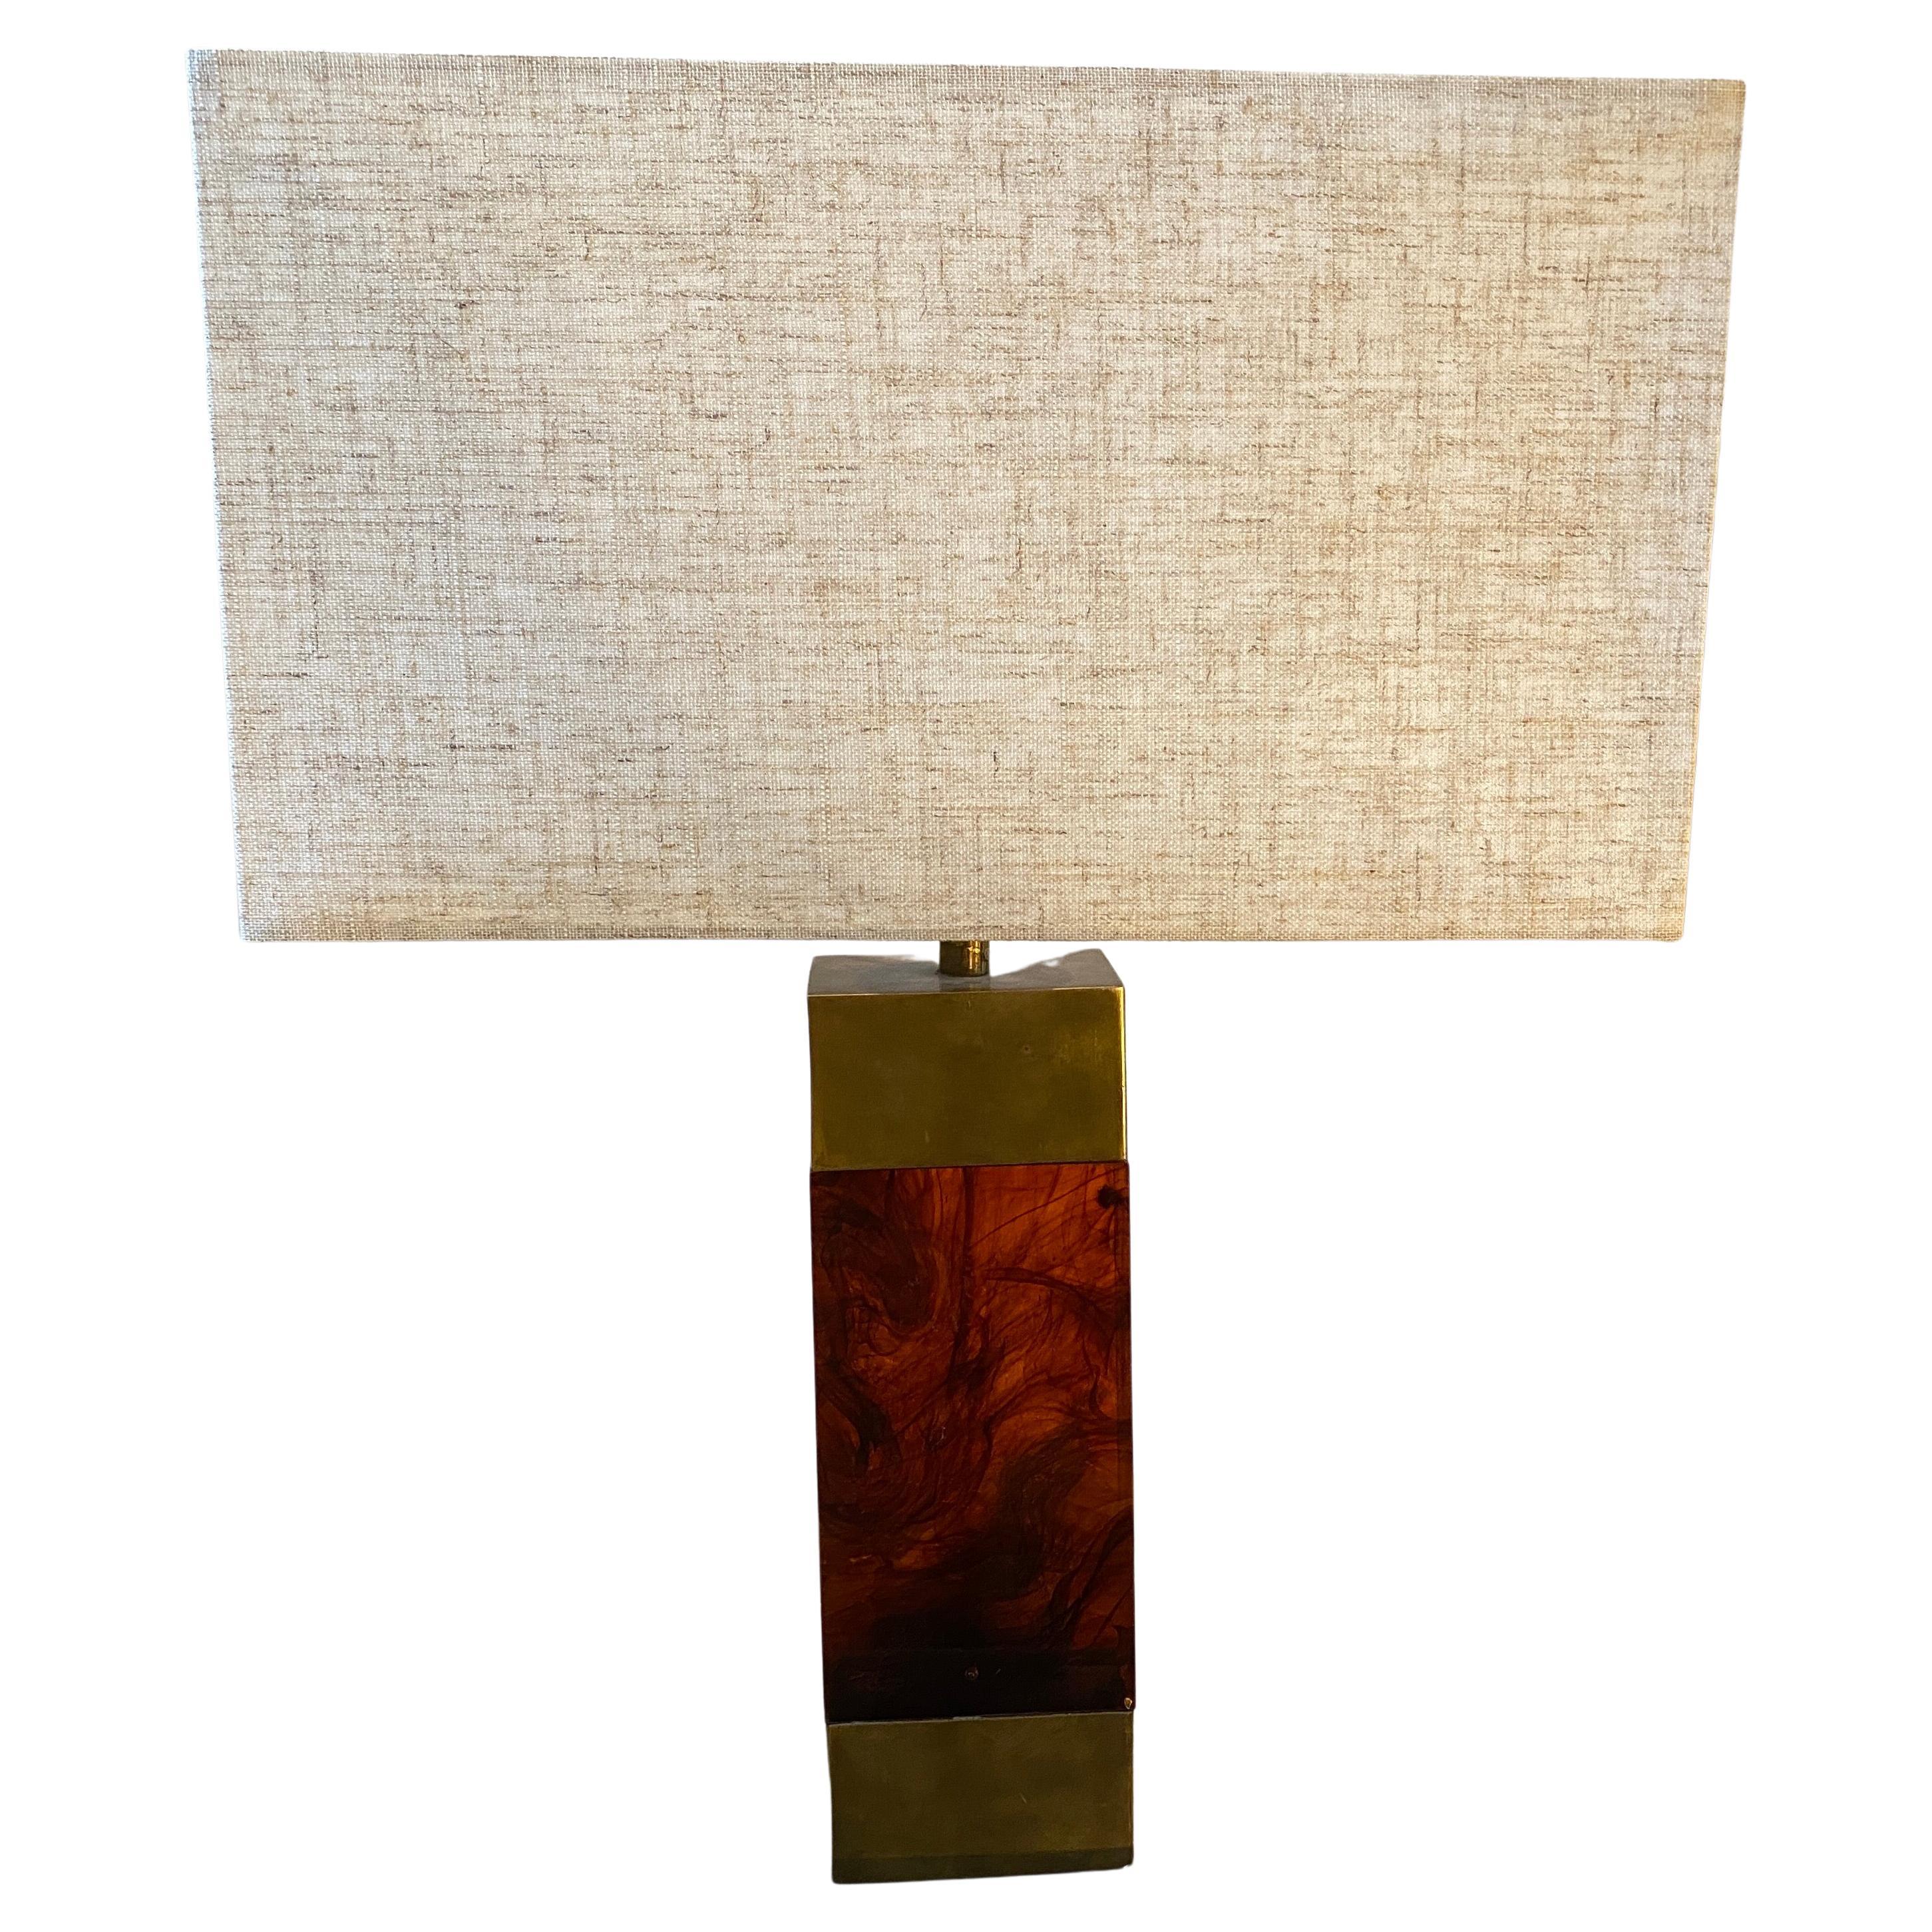 A brass and lucite table lamp designed and manufactured in Italy in the Seventies in the manner of Christian Dior Home, Signs of use and age visible on the photos, height without lampshade is 36 cm. It works both 110-240 volts and needs a regular